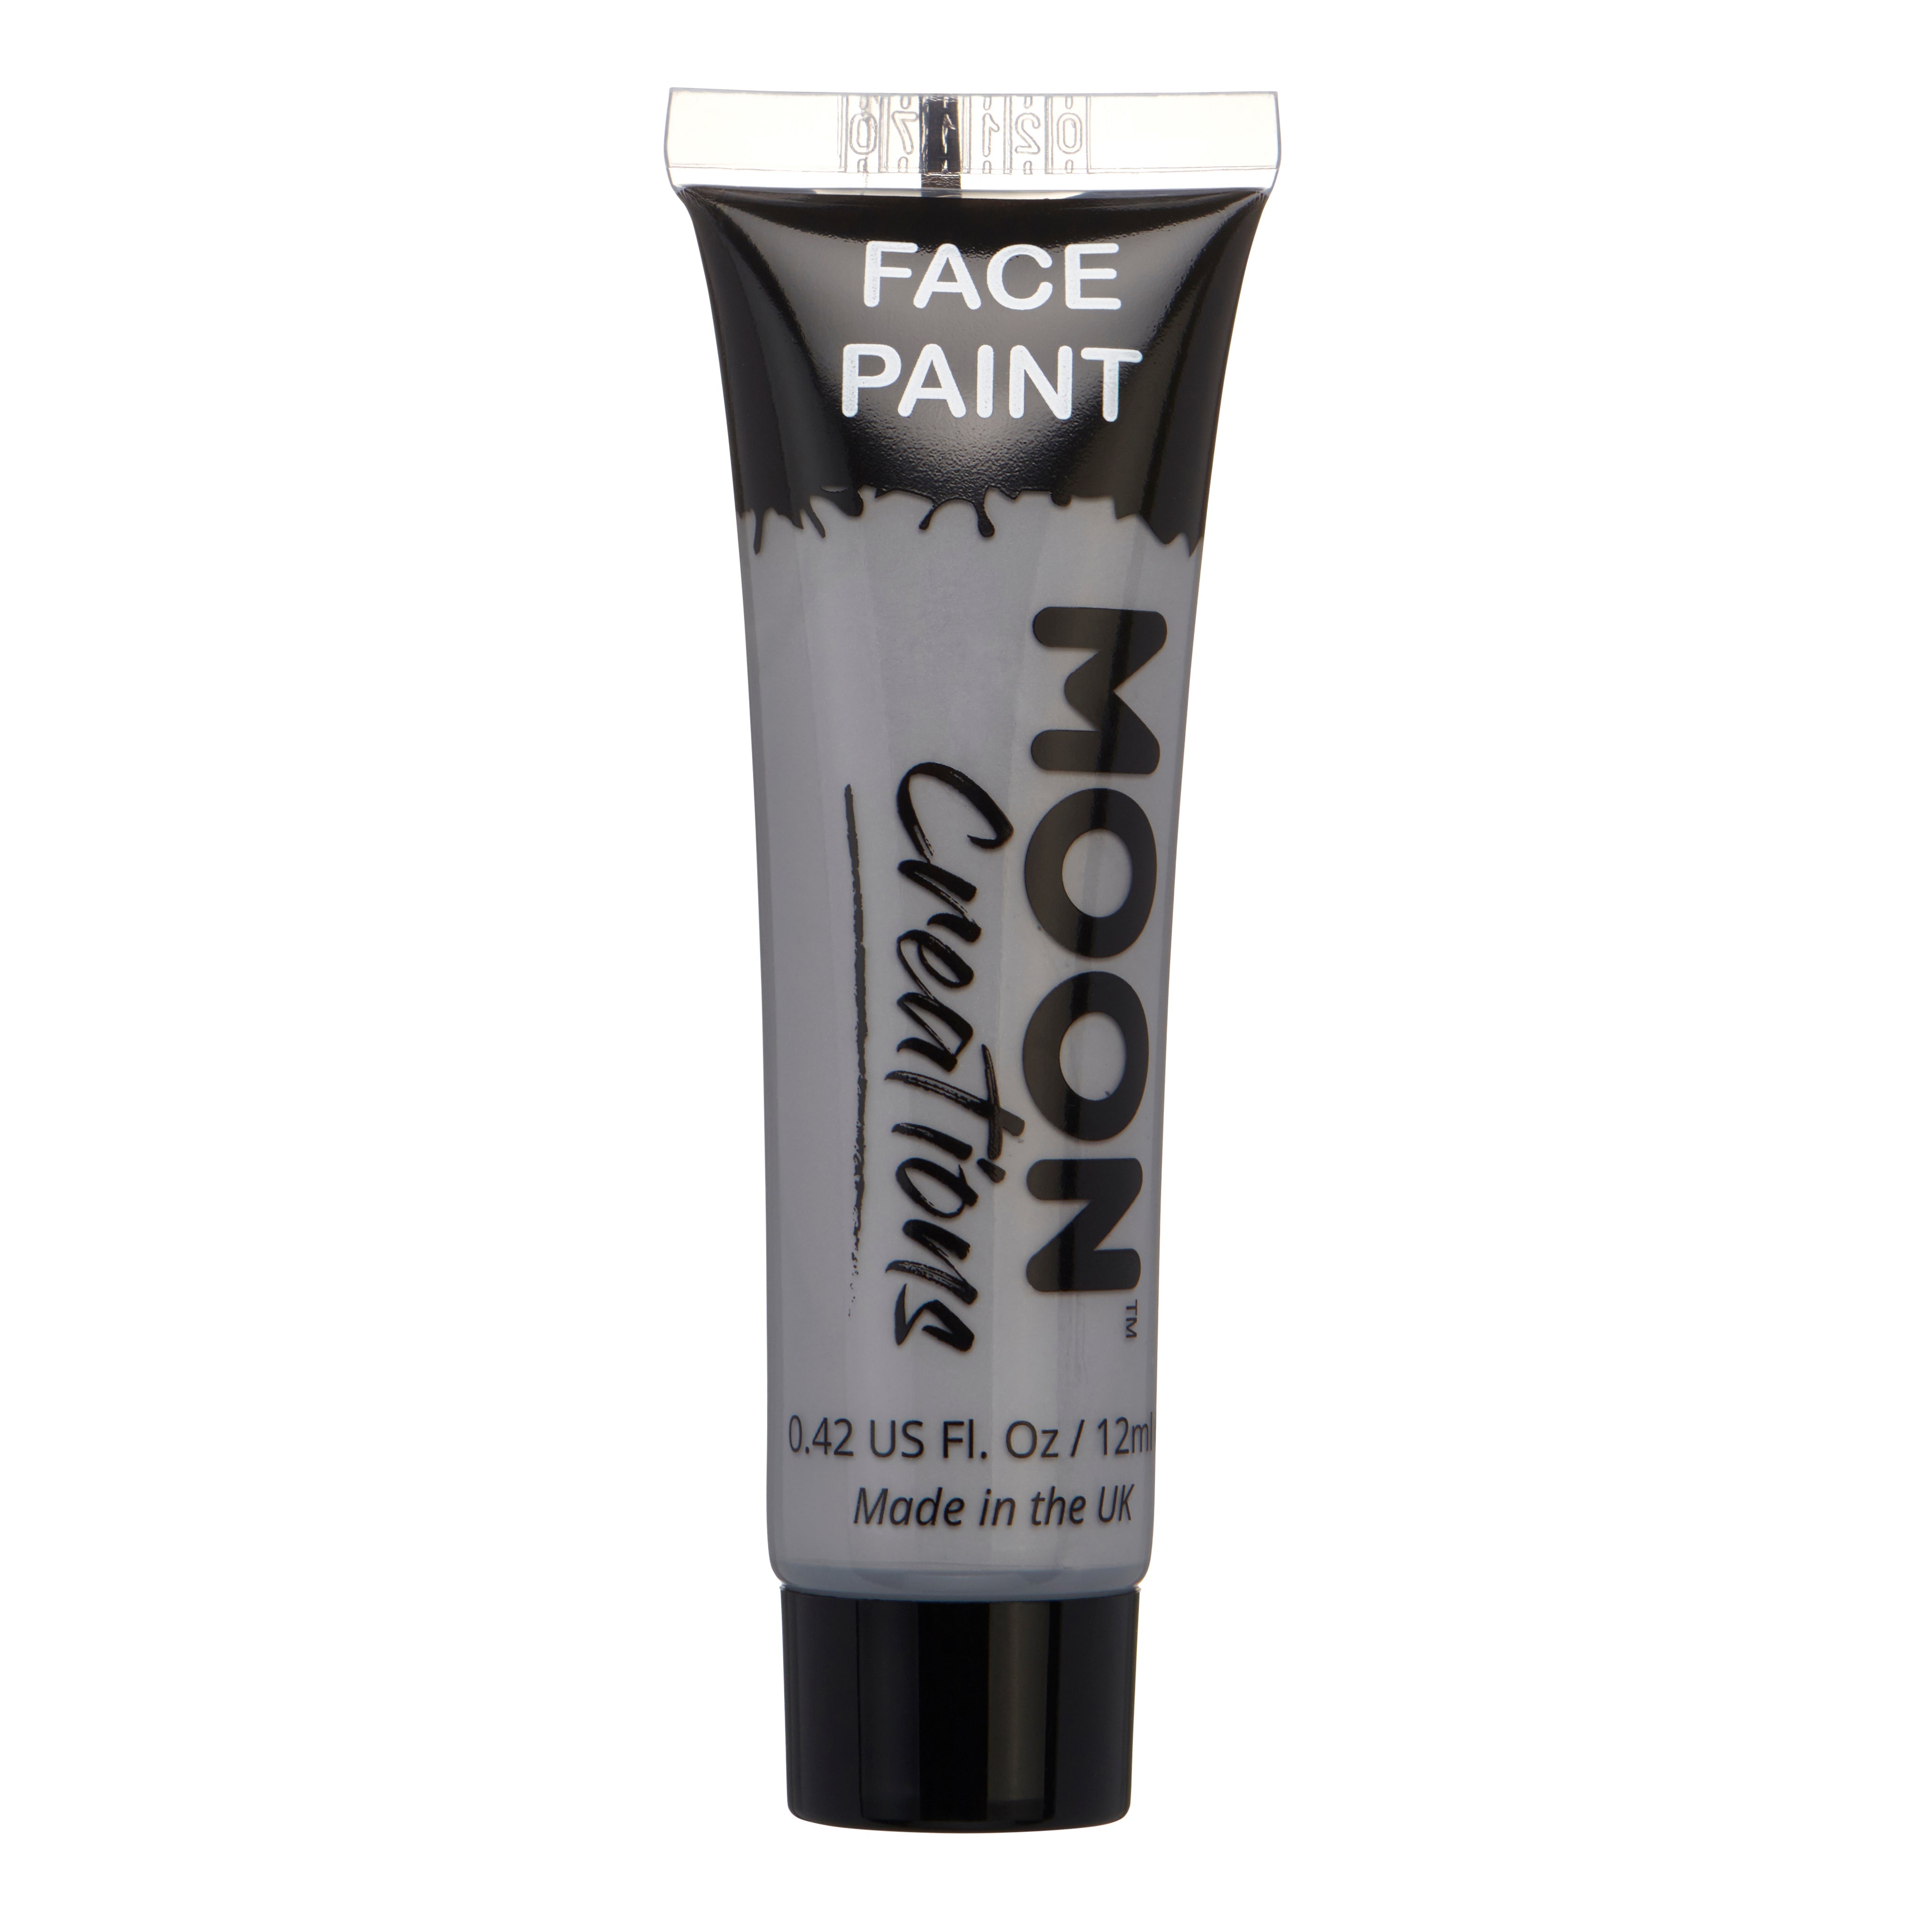 Grey - Face & Body Paint Makeup, 12mL. Cosmetically certified, FDA & Health Canada compliant, cruelty free and vegan.